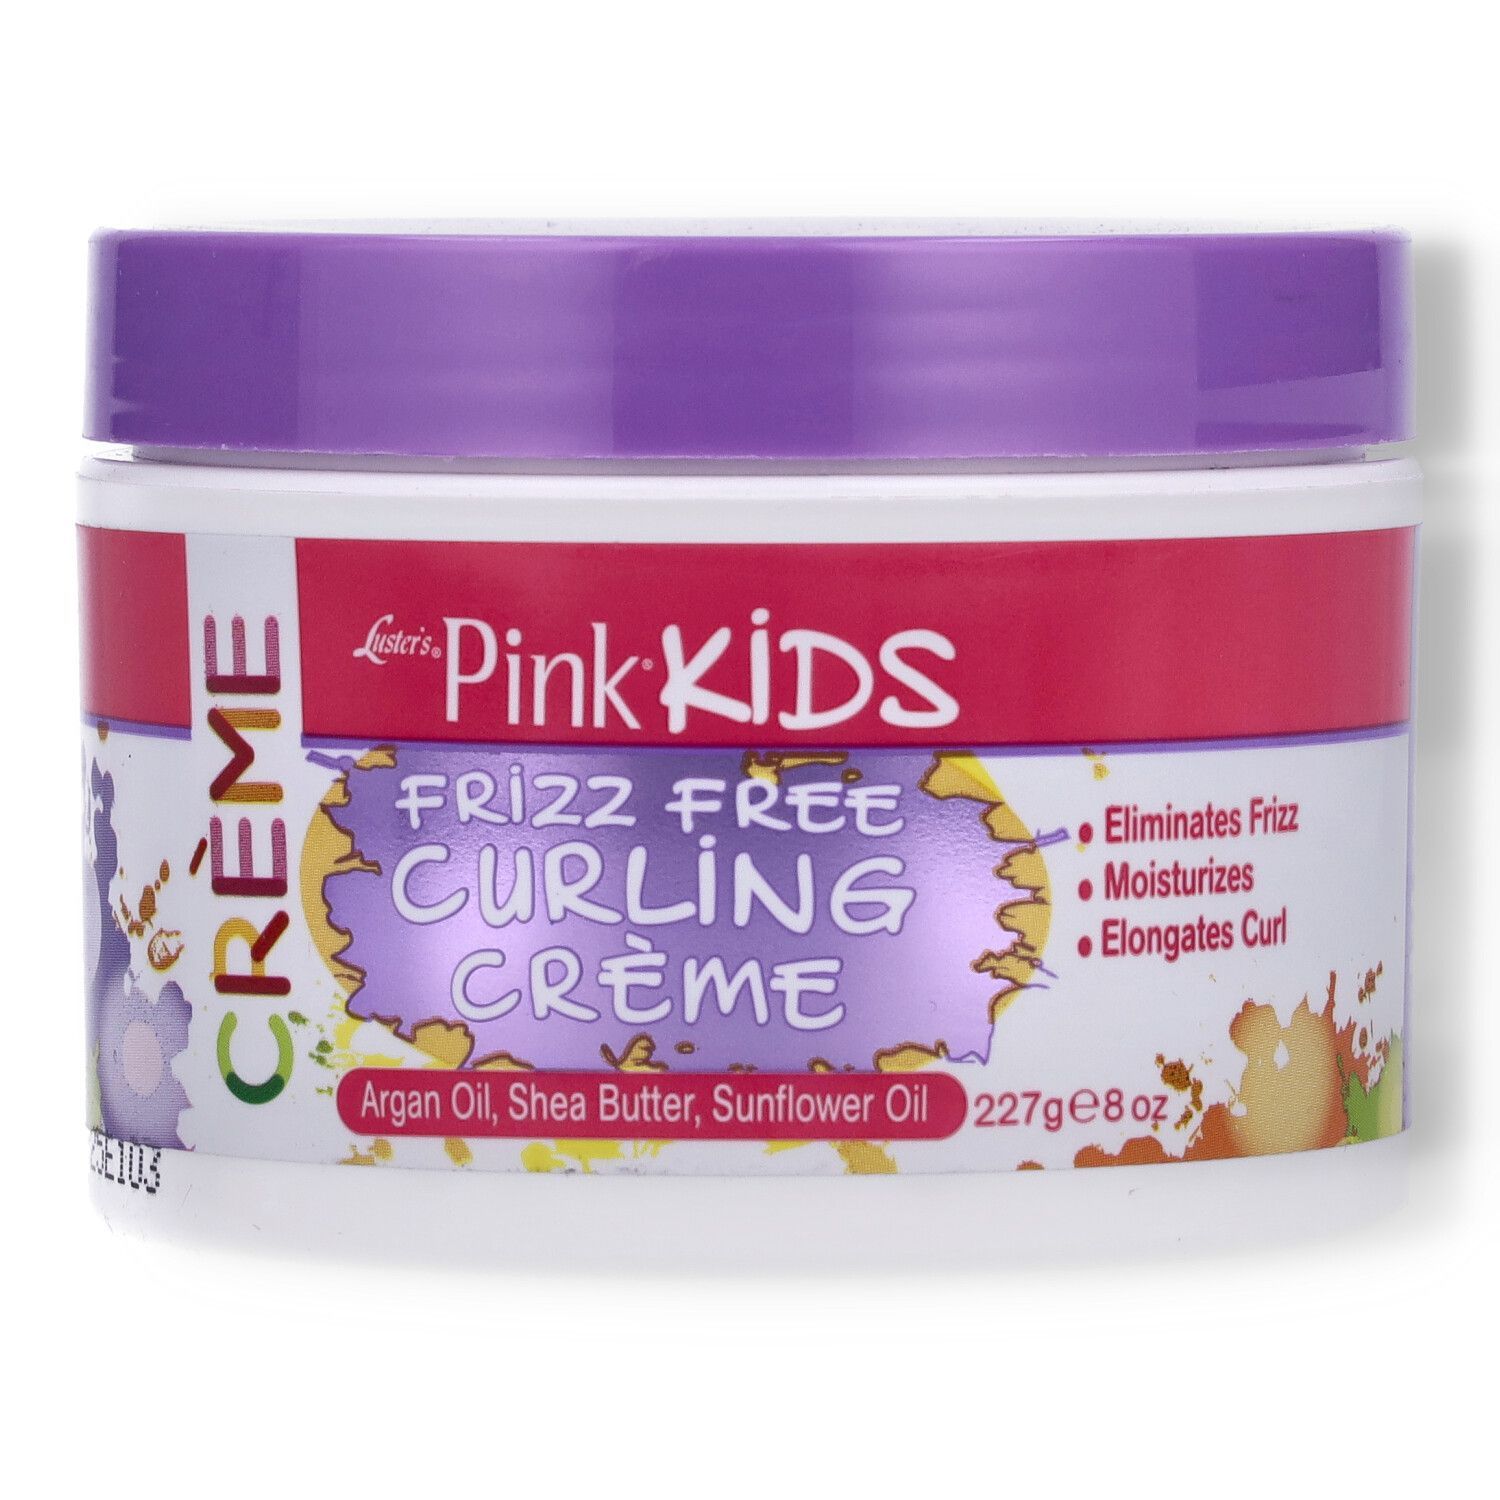 Luster's Pink Kids Frizz Free Curling Creme - 227g